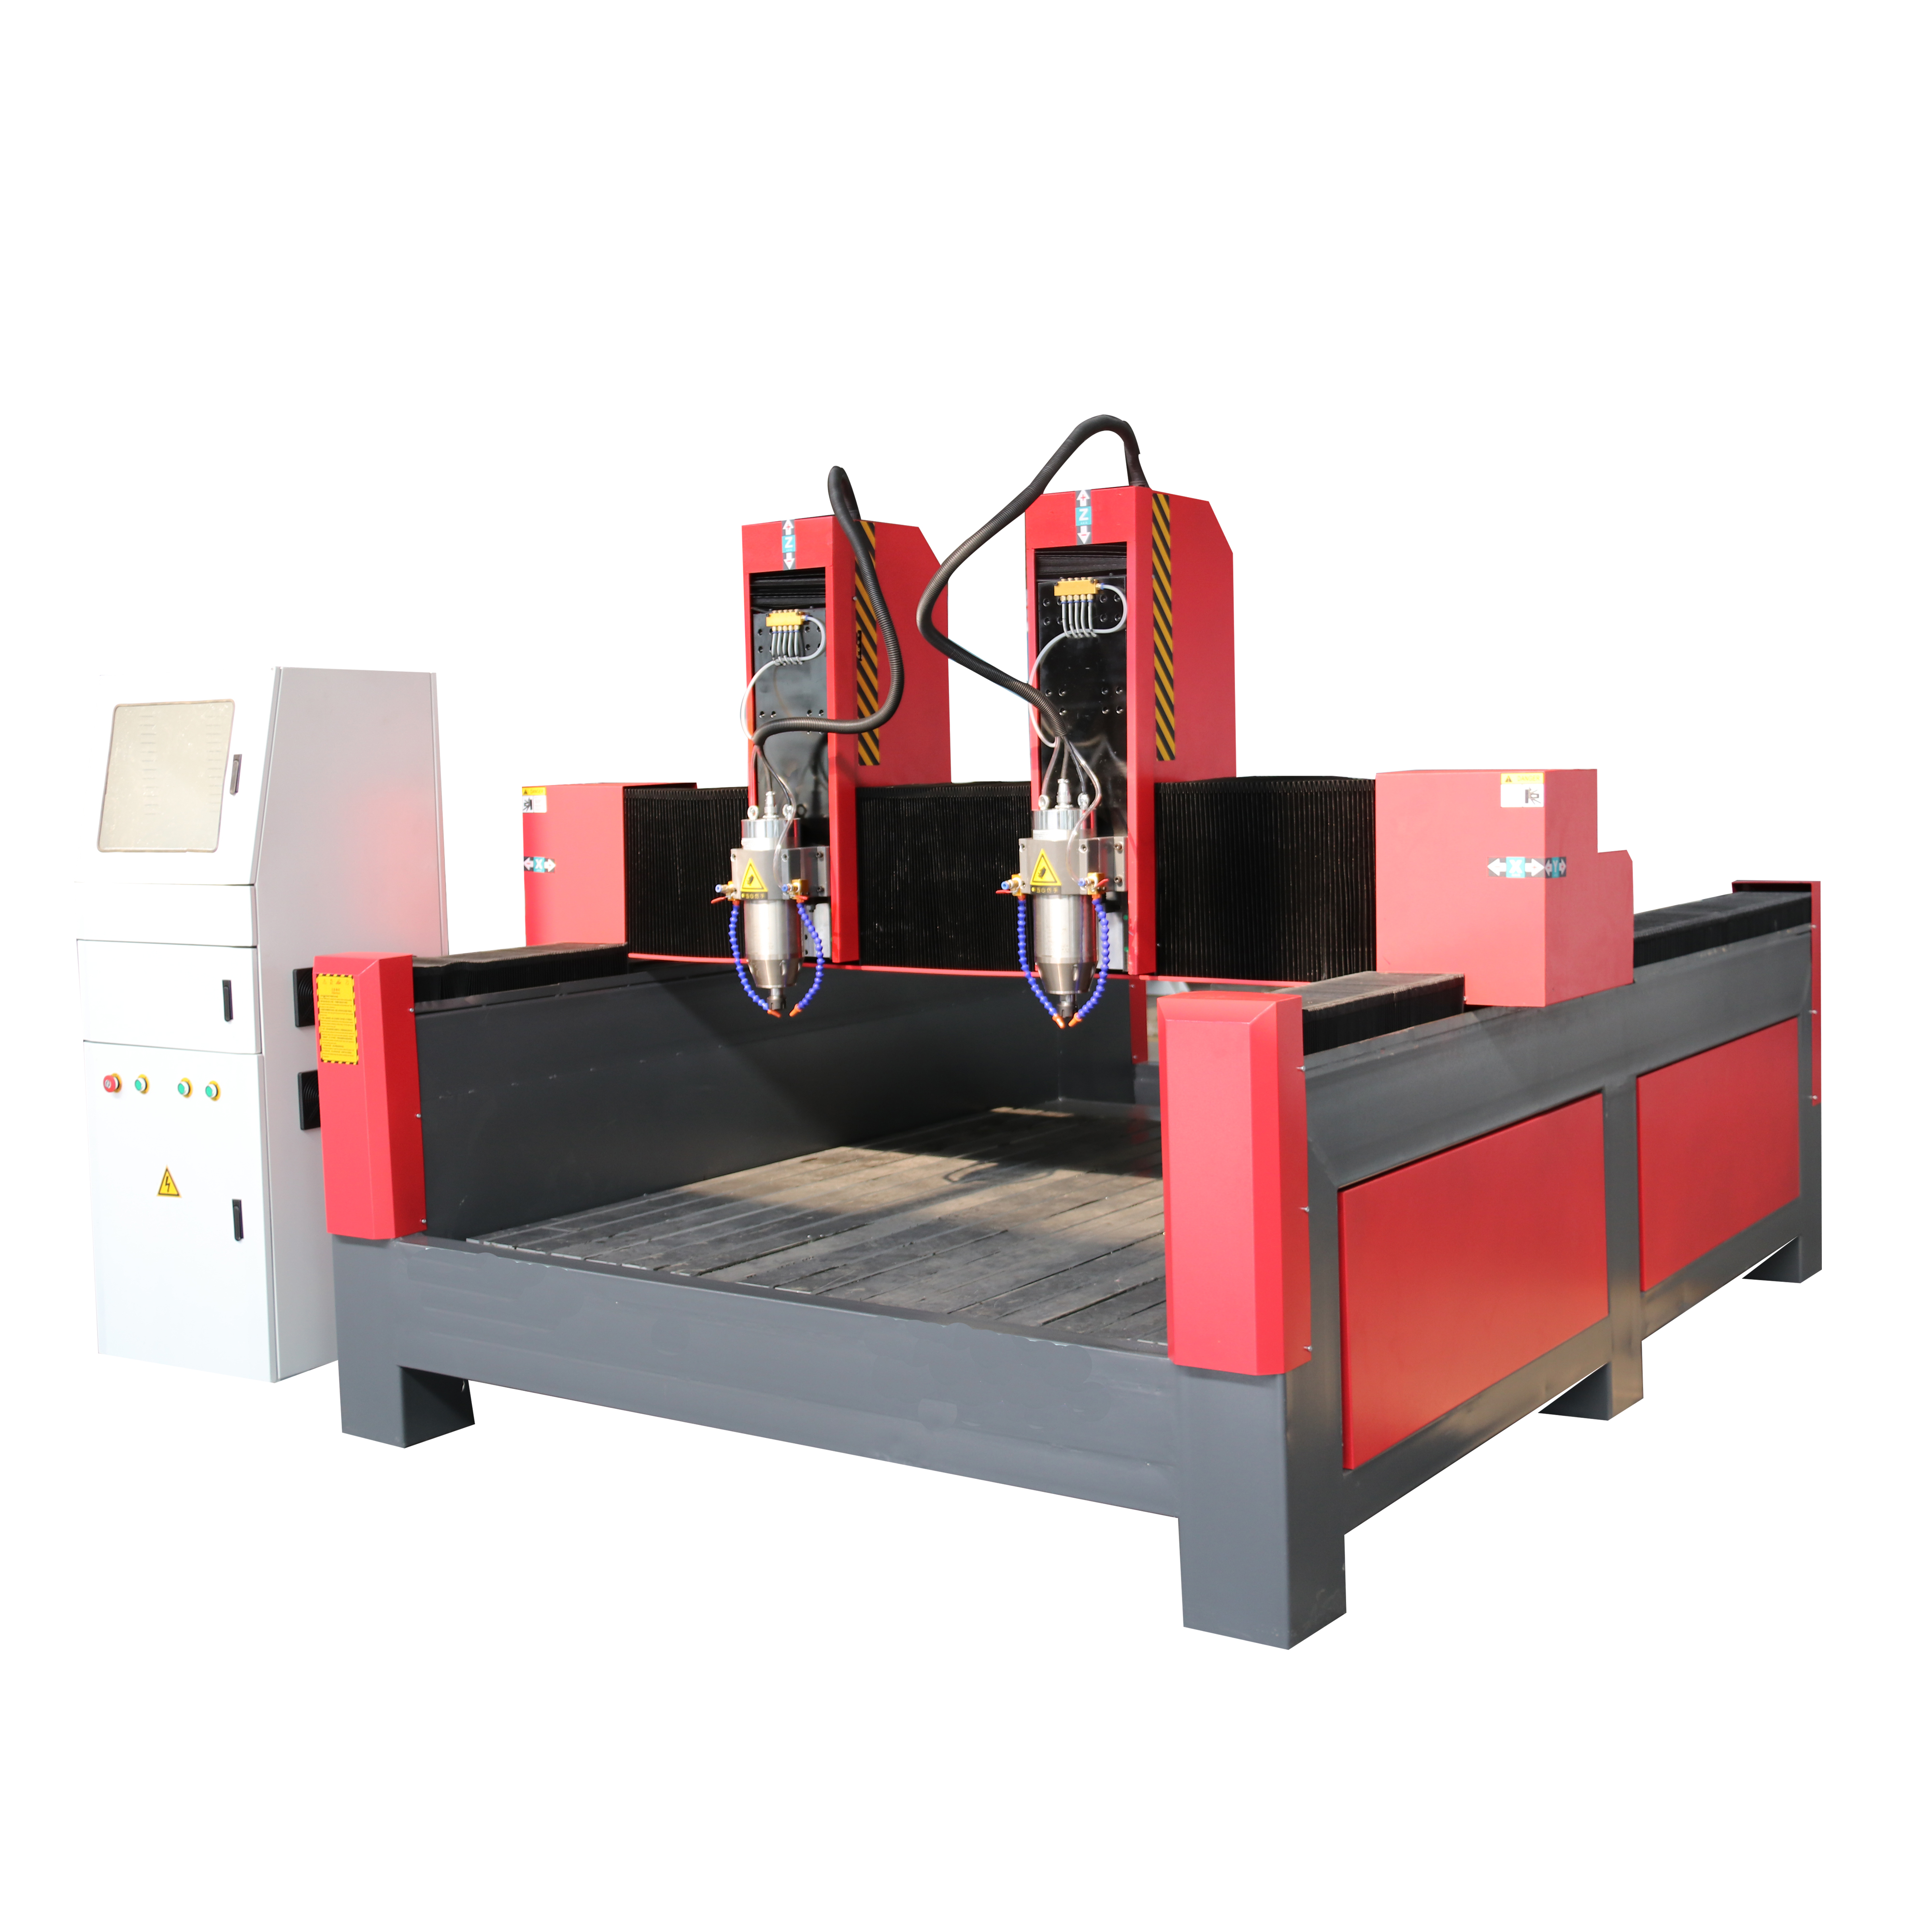 Jinan CNC Router Woodworking Machine For Wood Processing Furniture Making Marble&Stone CNC Router Machine 